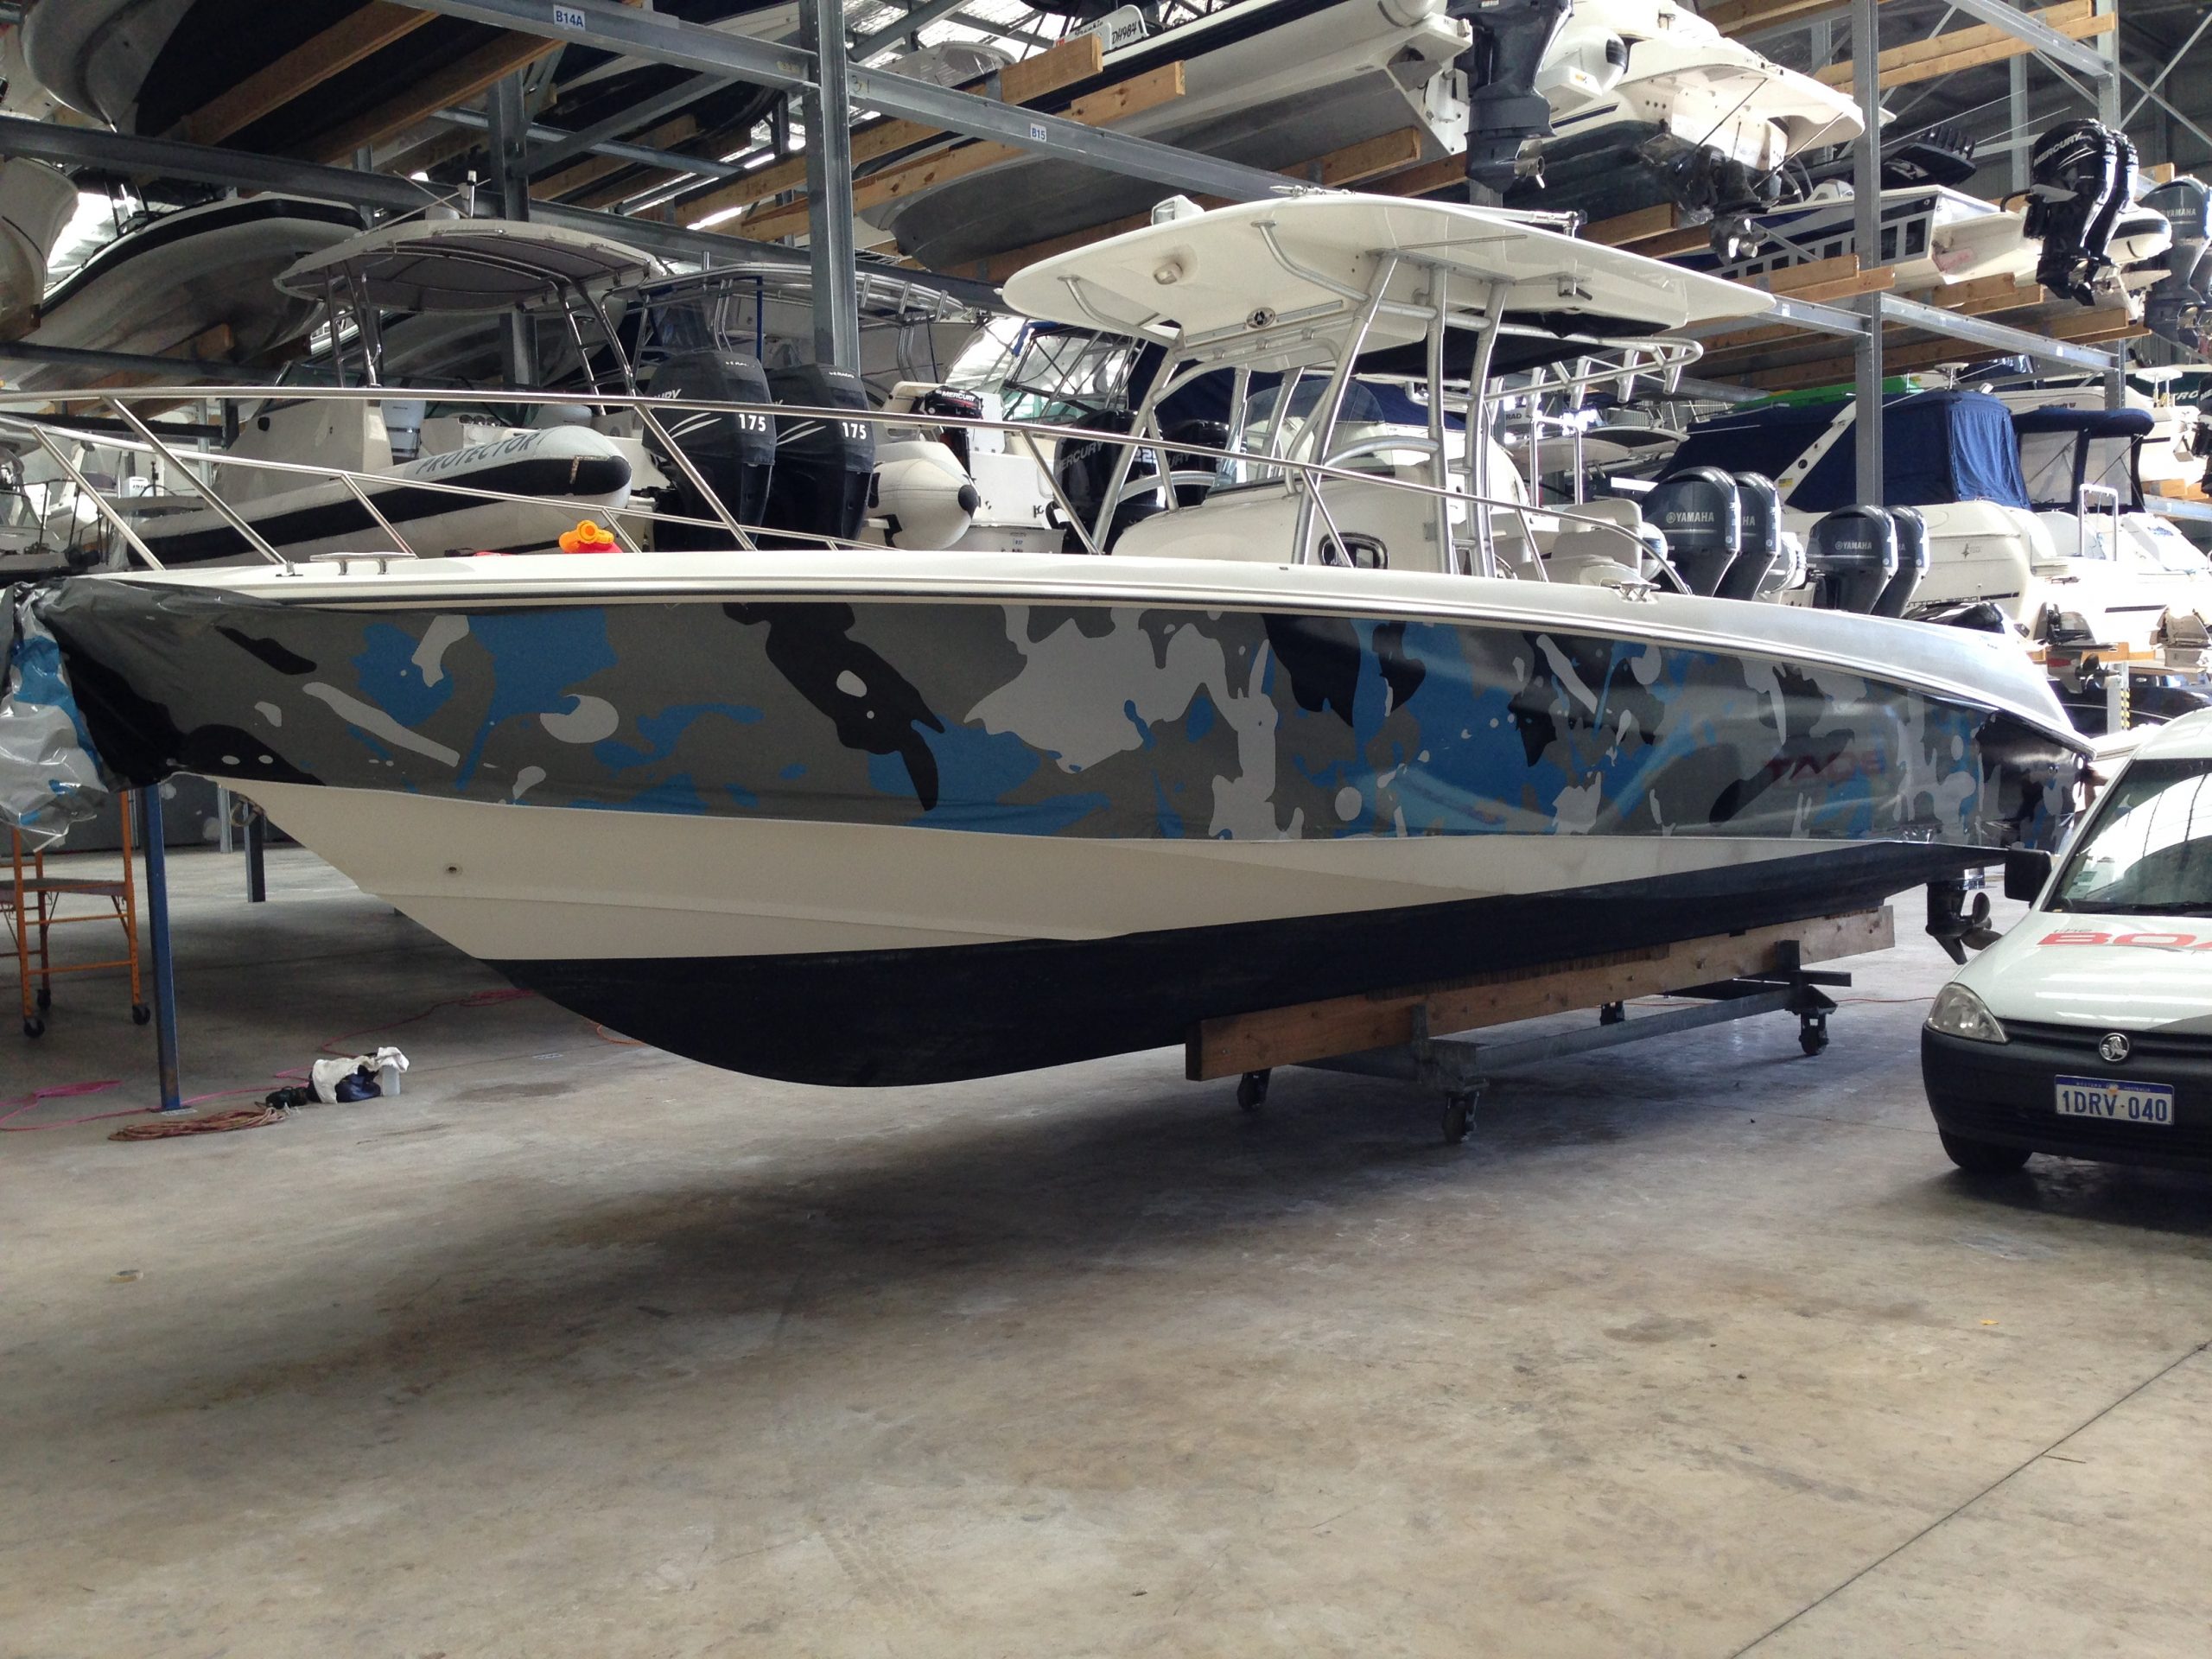 Hull Wraps Camo Boat Hull Wrap 2 scaled